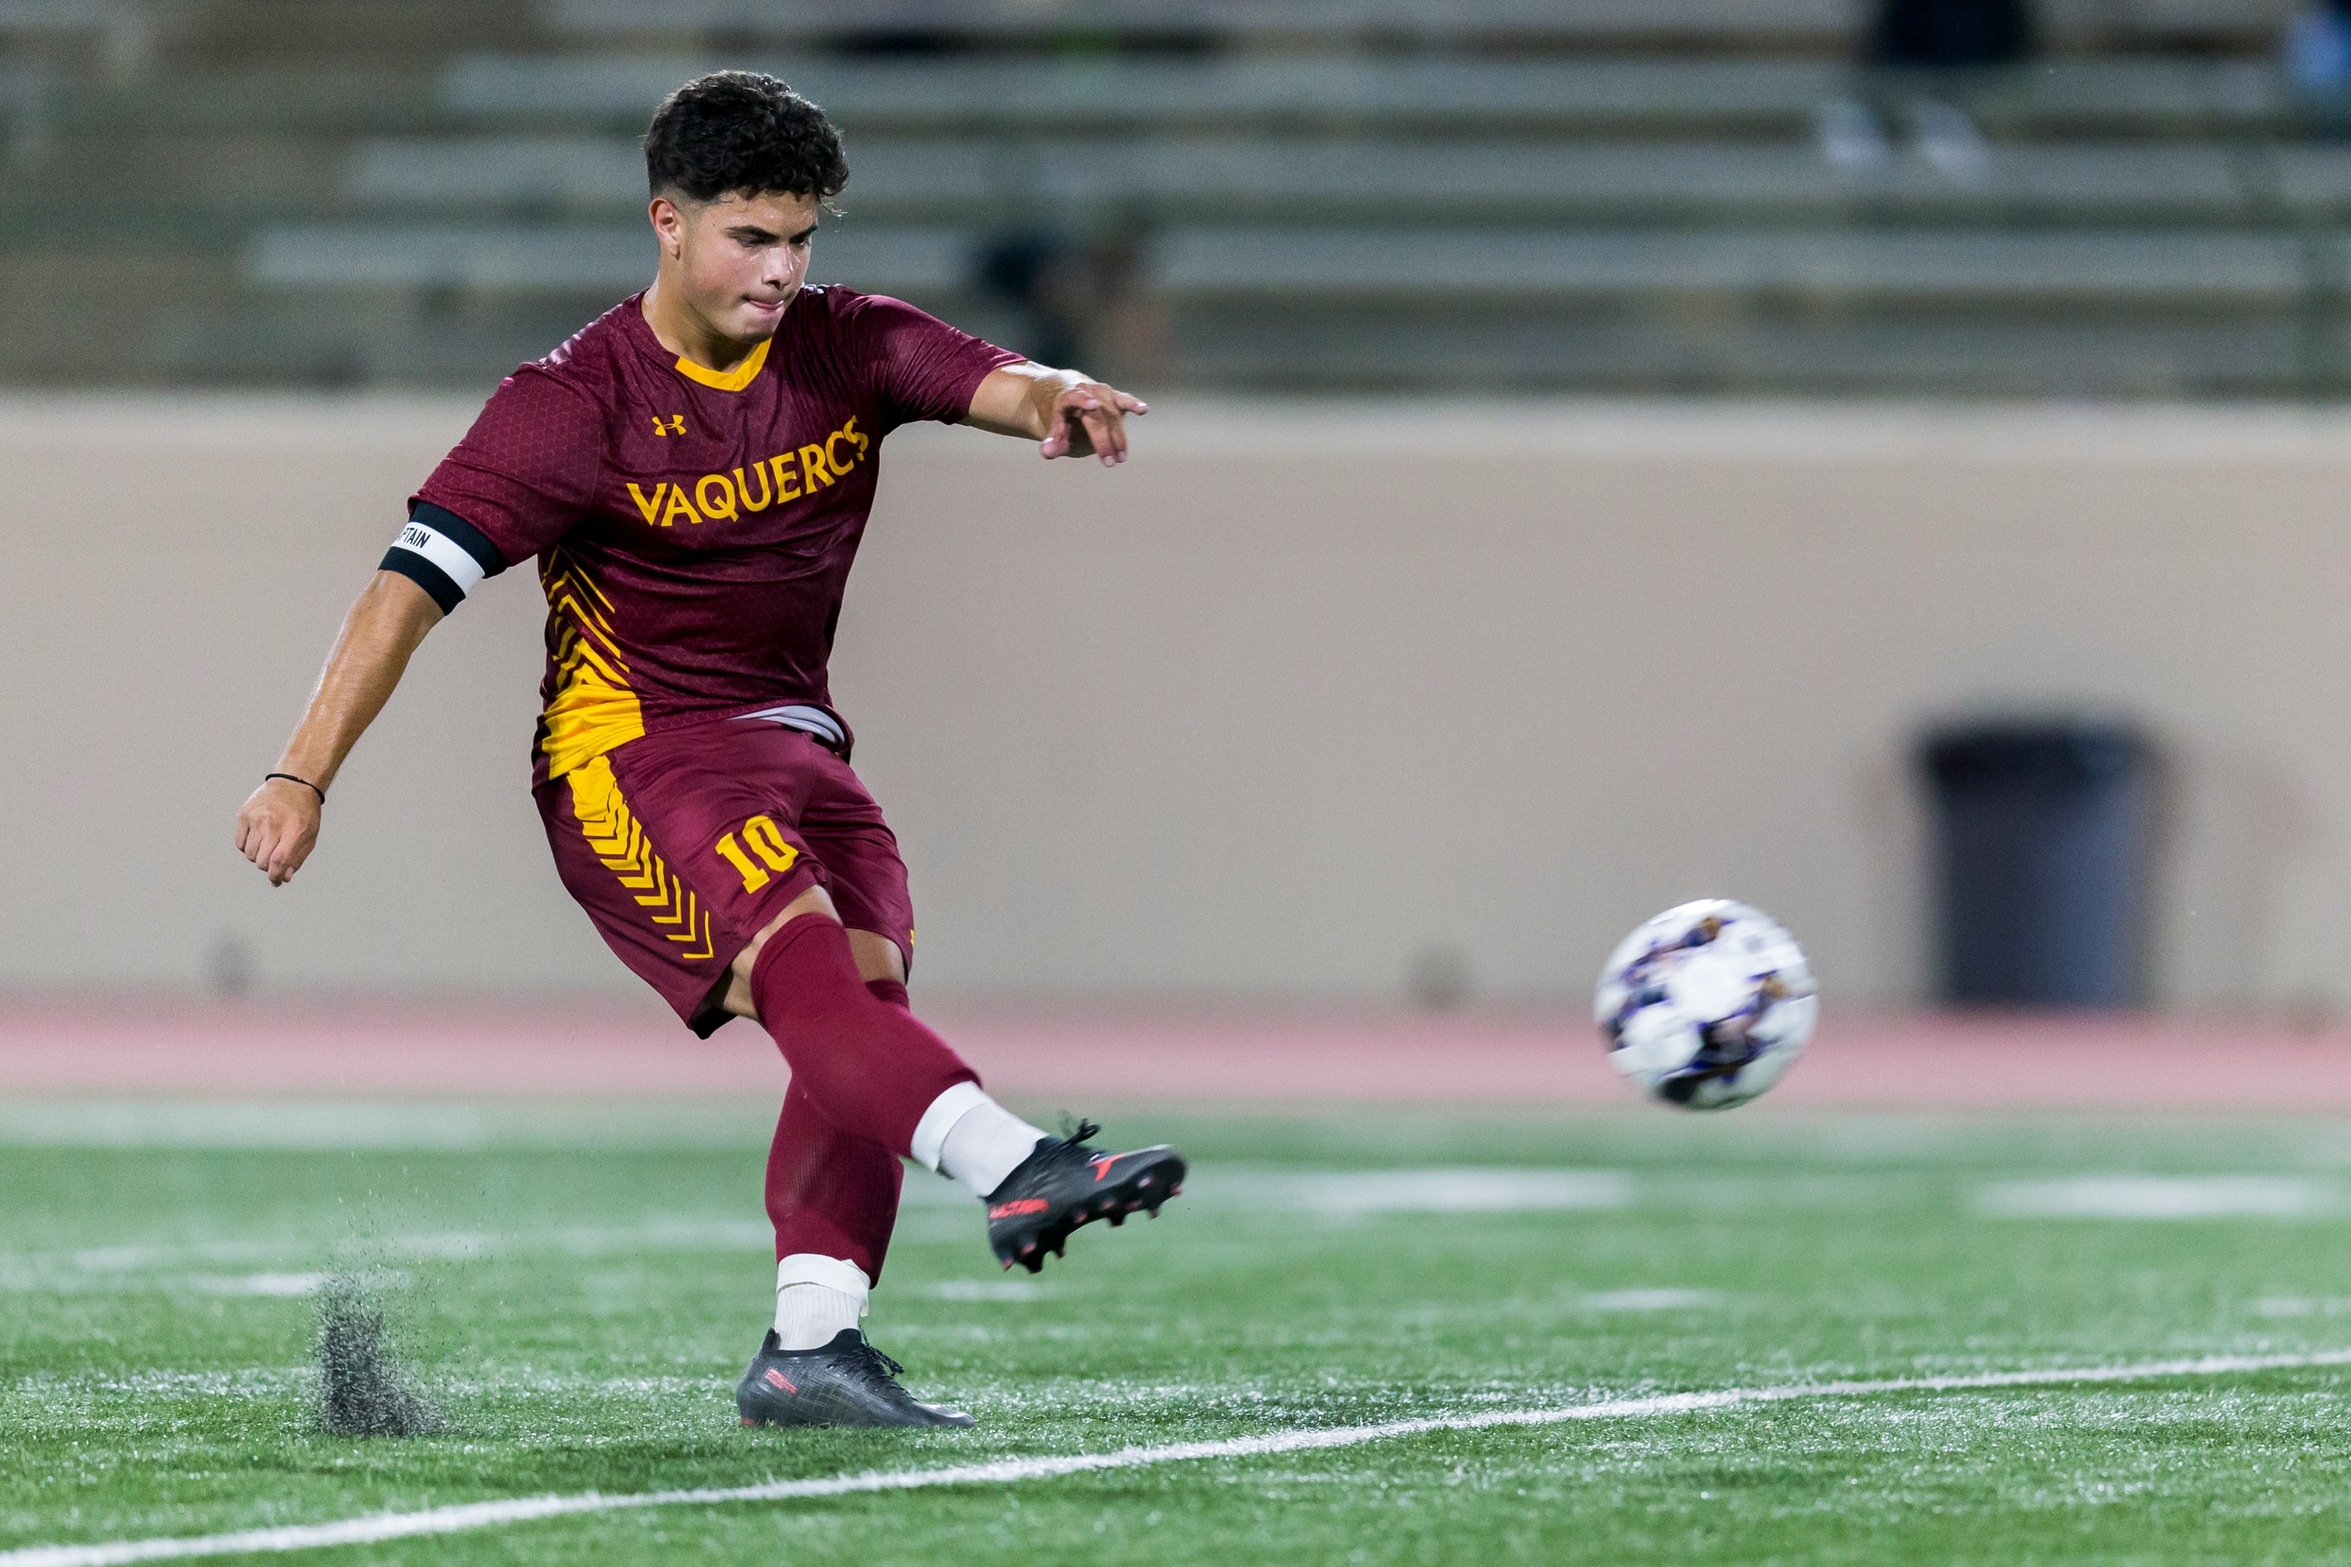 GCC Men's Soccer improves to 2-0 with 3-0 win over L.A. Harbor August 30